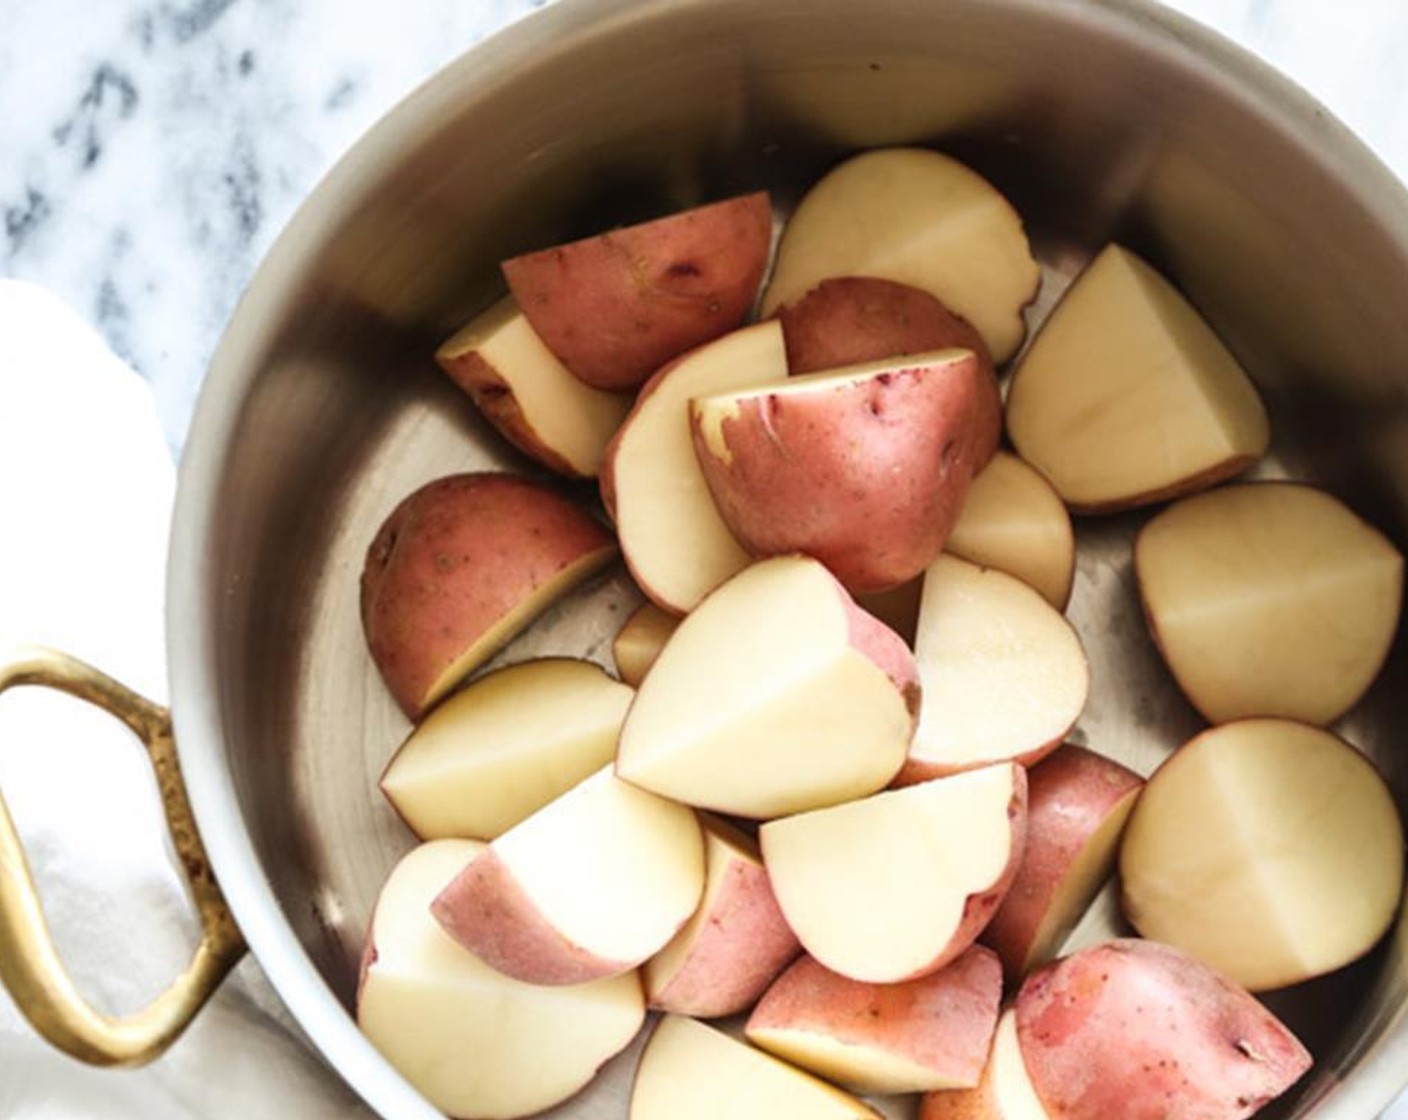 step 2 Meanwhile, place the Red Potatoes (6 cups) in a large saucepan or stockpot and cover with well-salted cold water by 2 inches. Bring to a boil and simmer until the potatoes are fork tender, about 15 minutes. Drain well and transfer to a large mixing bowl.